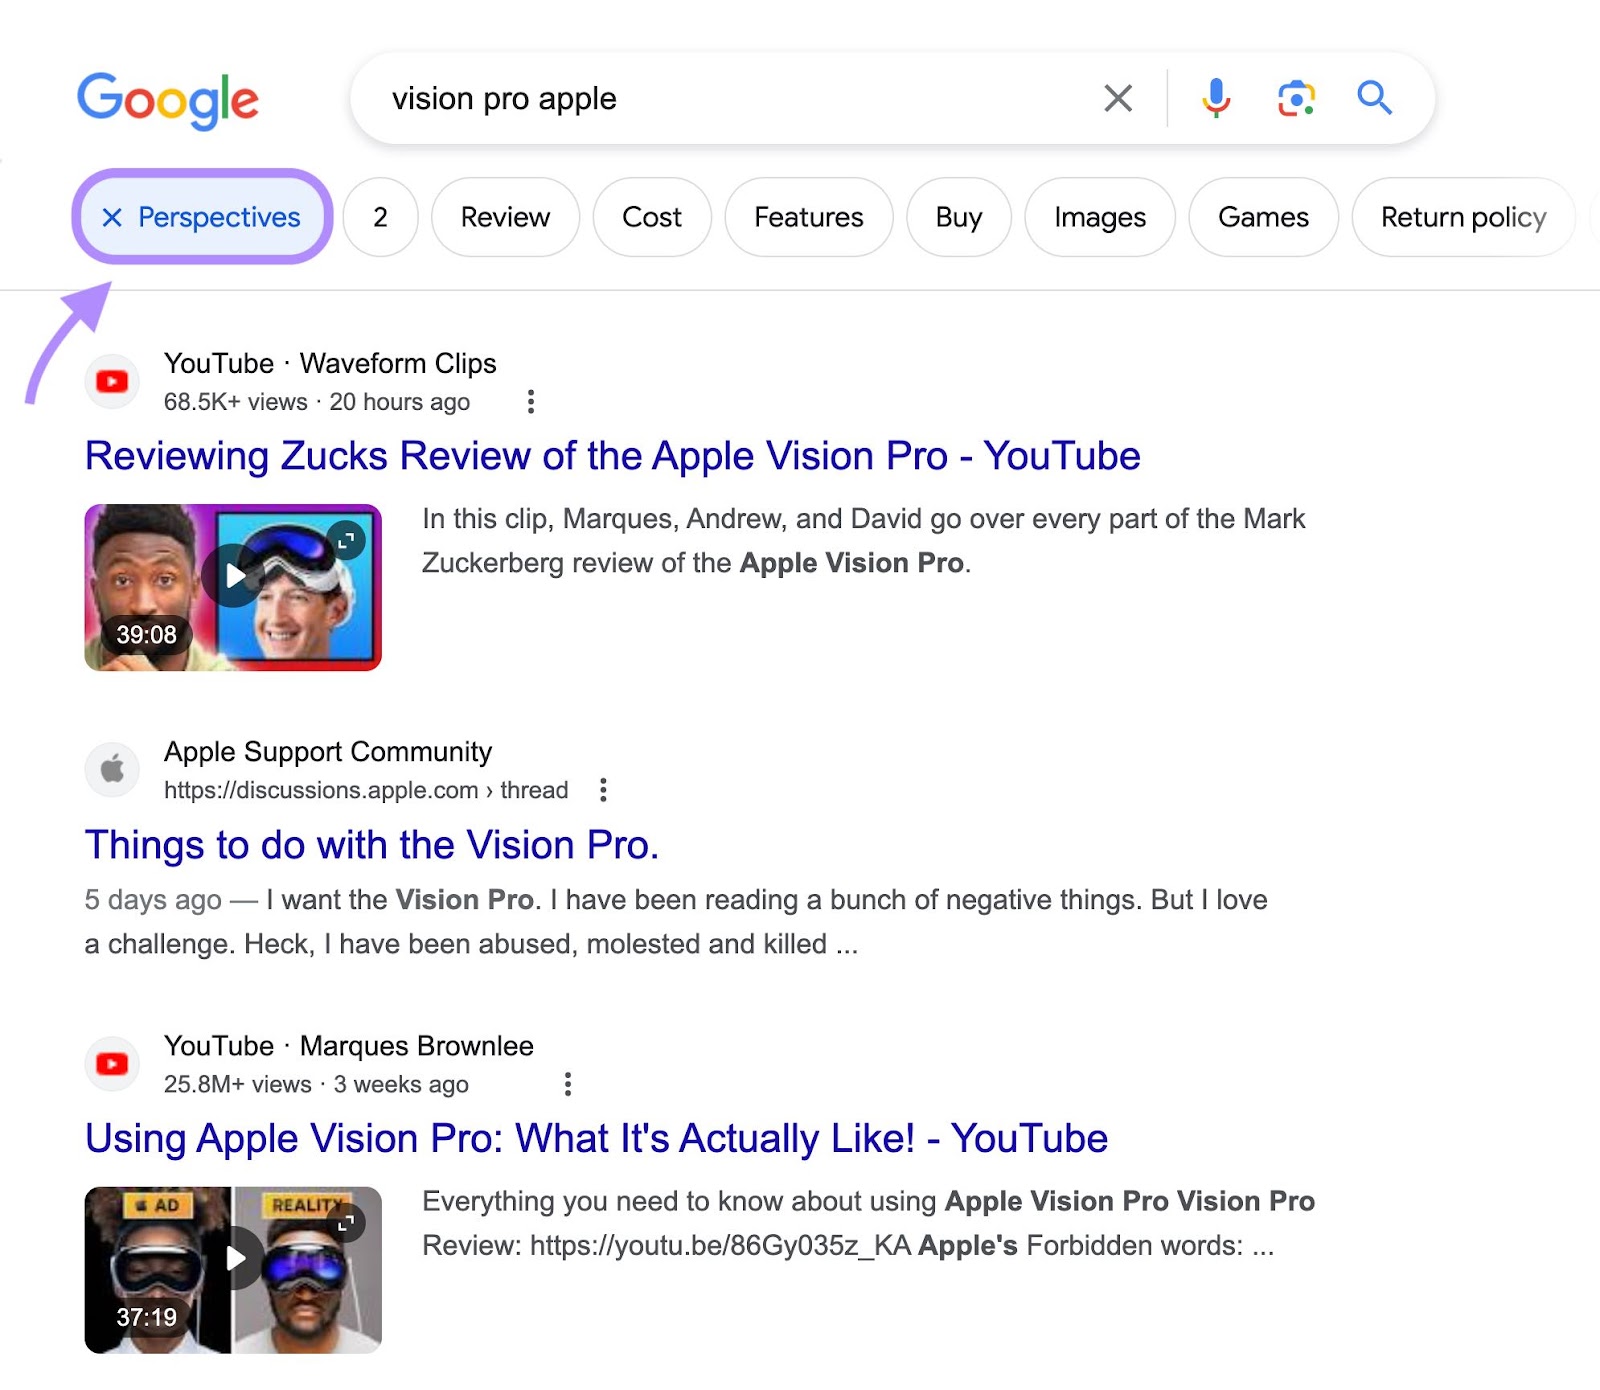 “Perspectives” filter on Google SERP